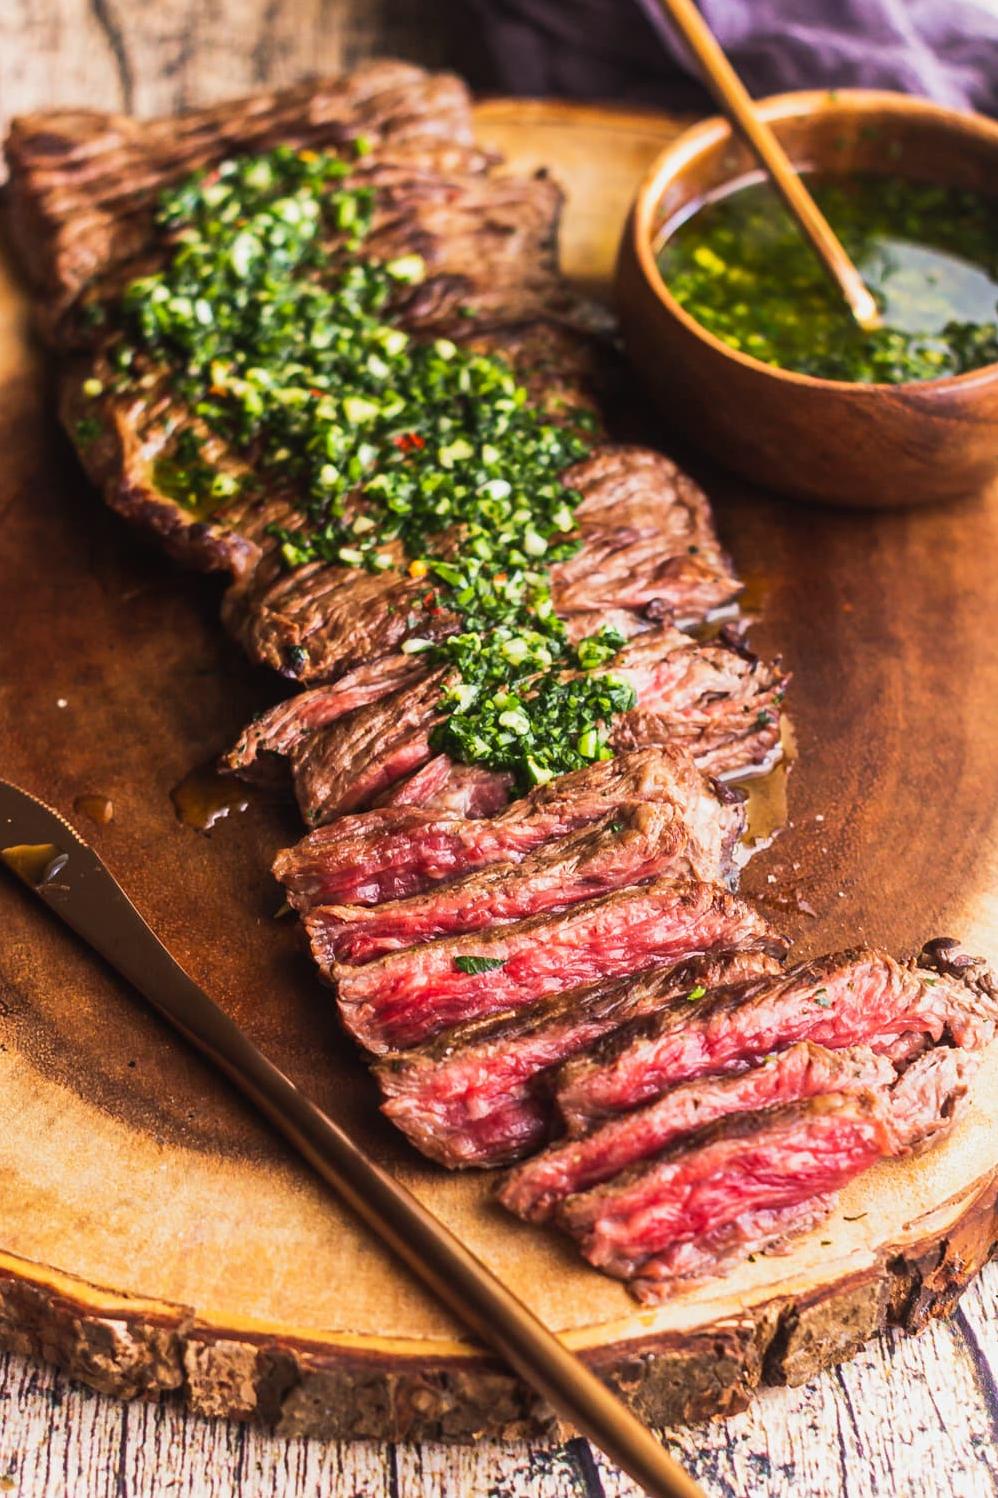  A perfect balance of sweet and tangy, this chimichurri sauce is a game changer.